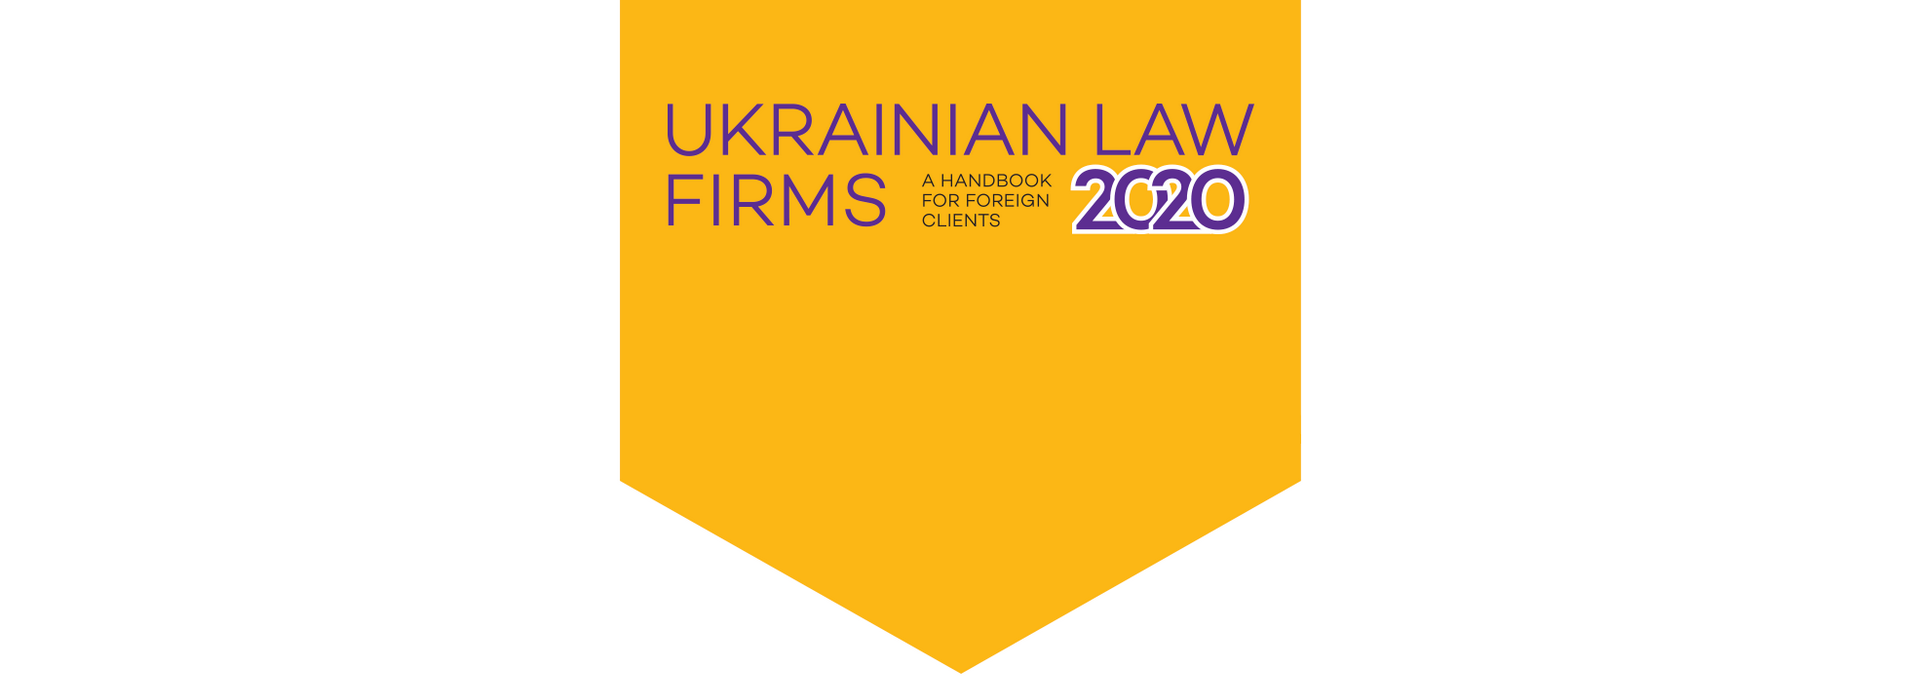 GOLAW Has Been Recognised by the National Research Program “Ukrainian Law Firms: A Handbook for Foreign Clients 2020”